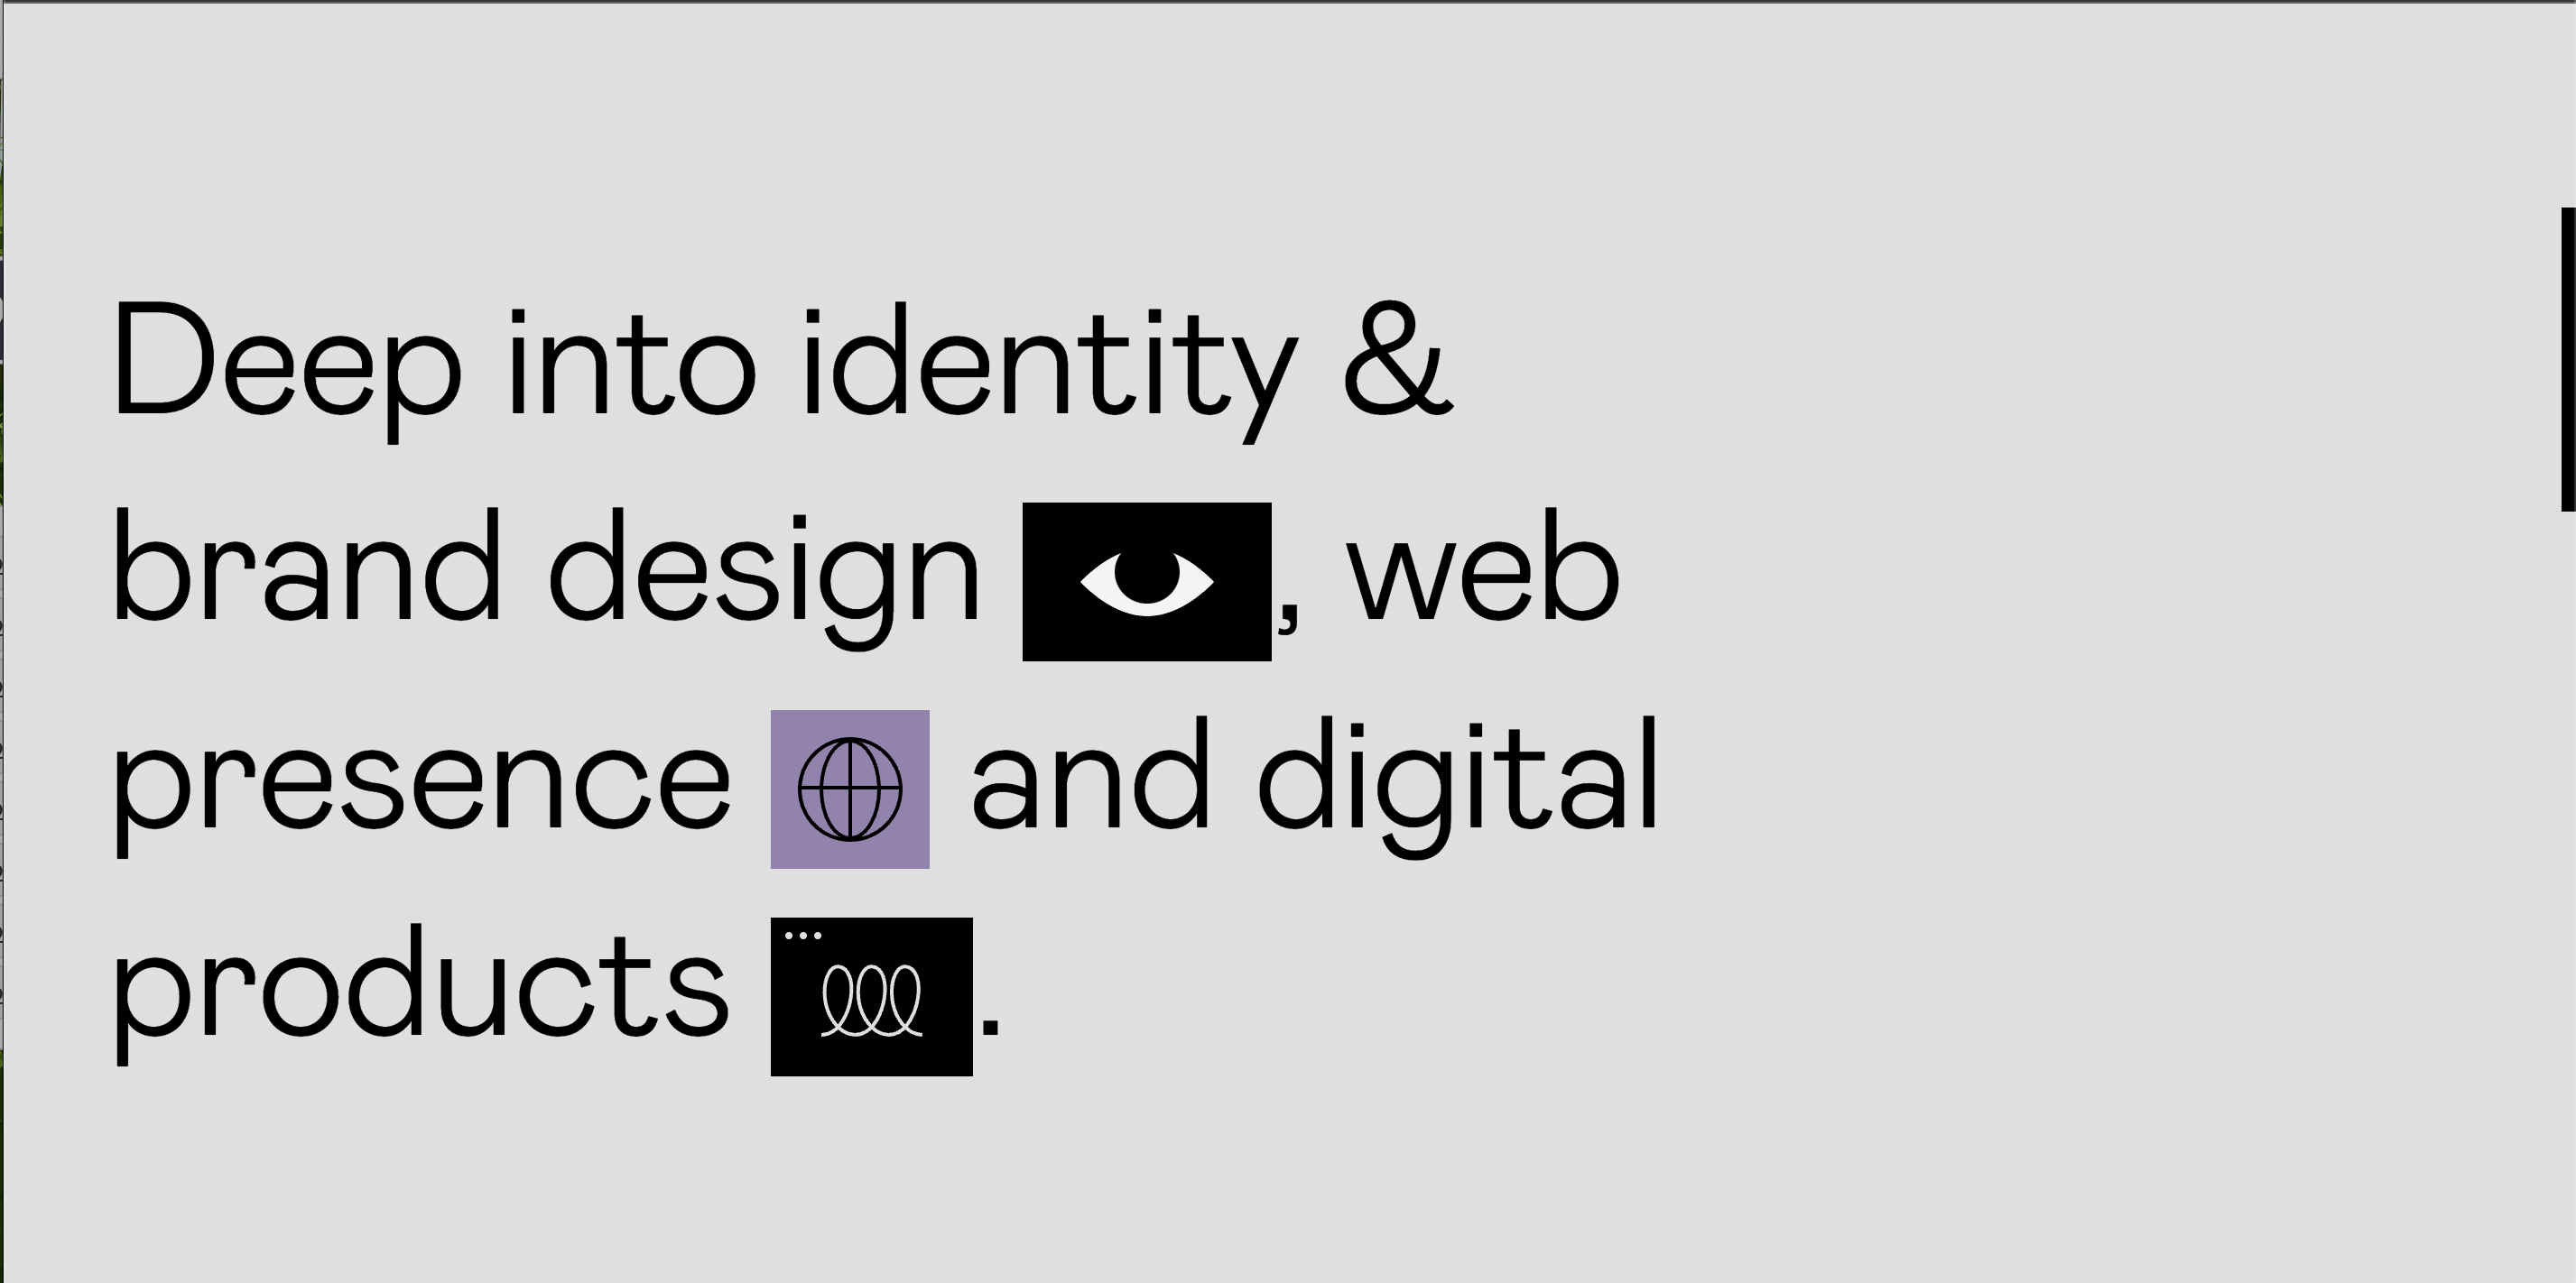 A page from Vladimir Gruev's resume website. The text reads "deep into identity and brand design, web presence, and digital products." Each item in that list is accompanied with a small square icon. 